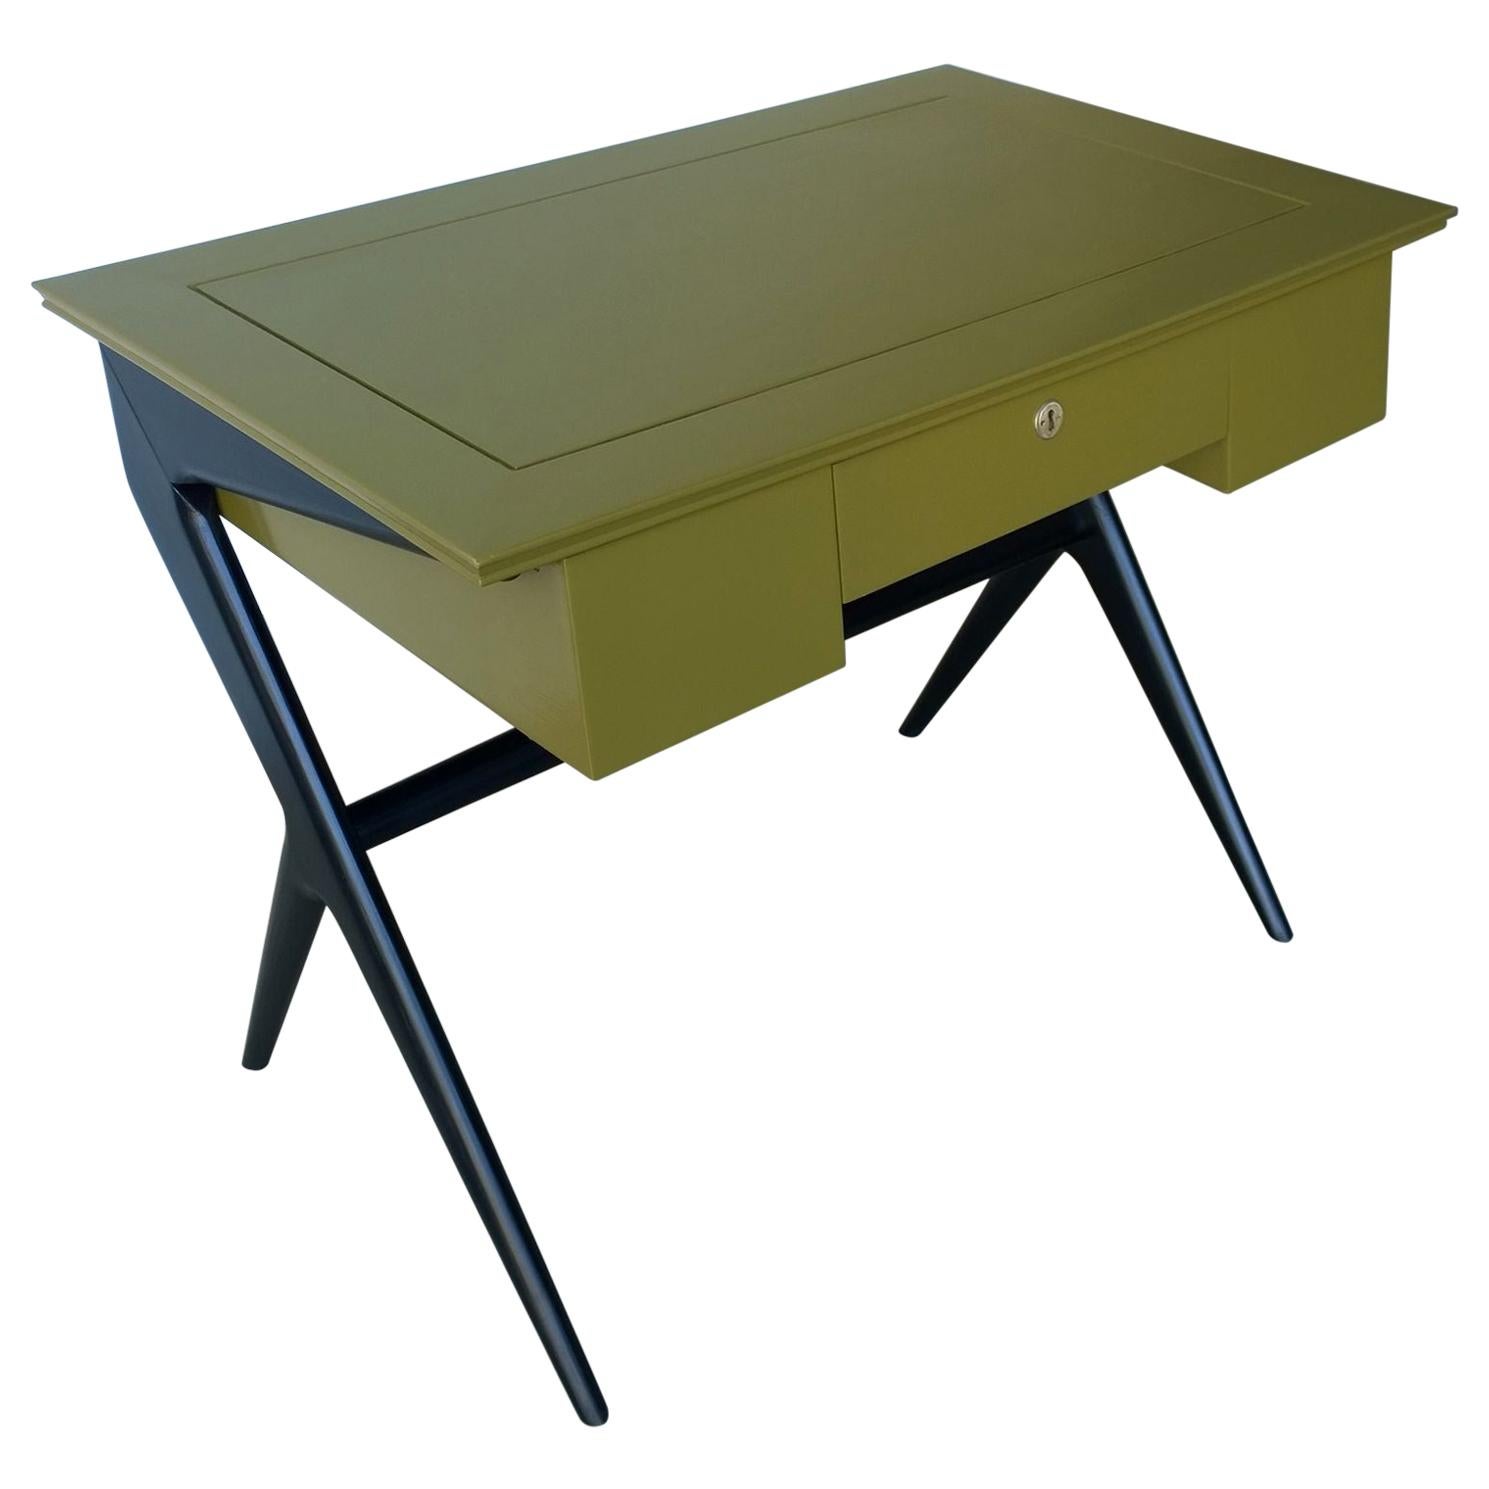 Italian Newly Lacquered in a Bronze Green & Black 1-Drawer Desk / Writing Table